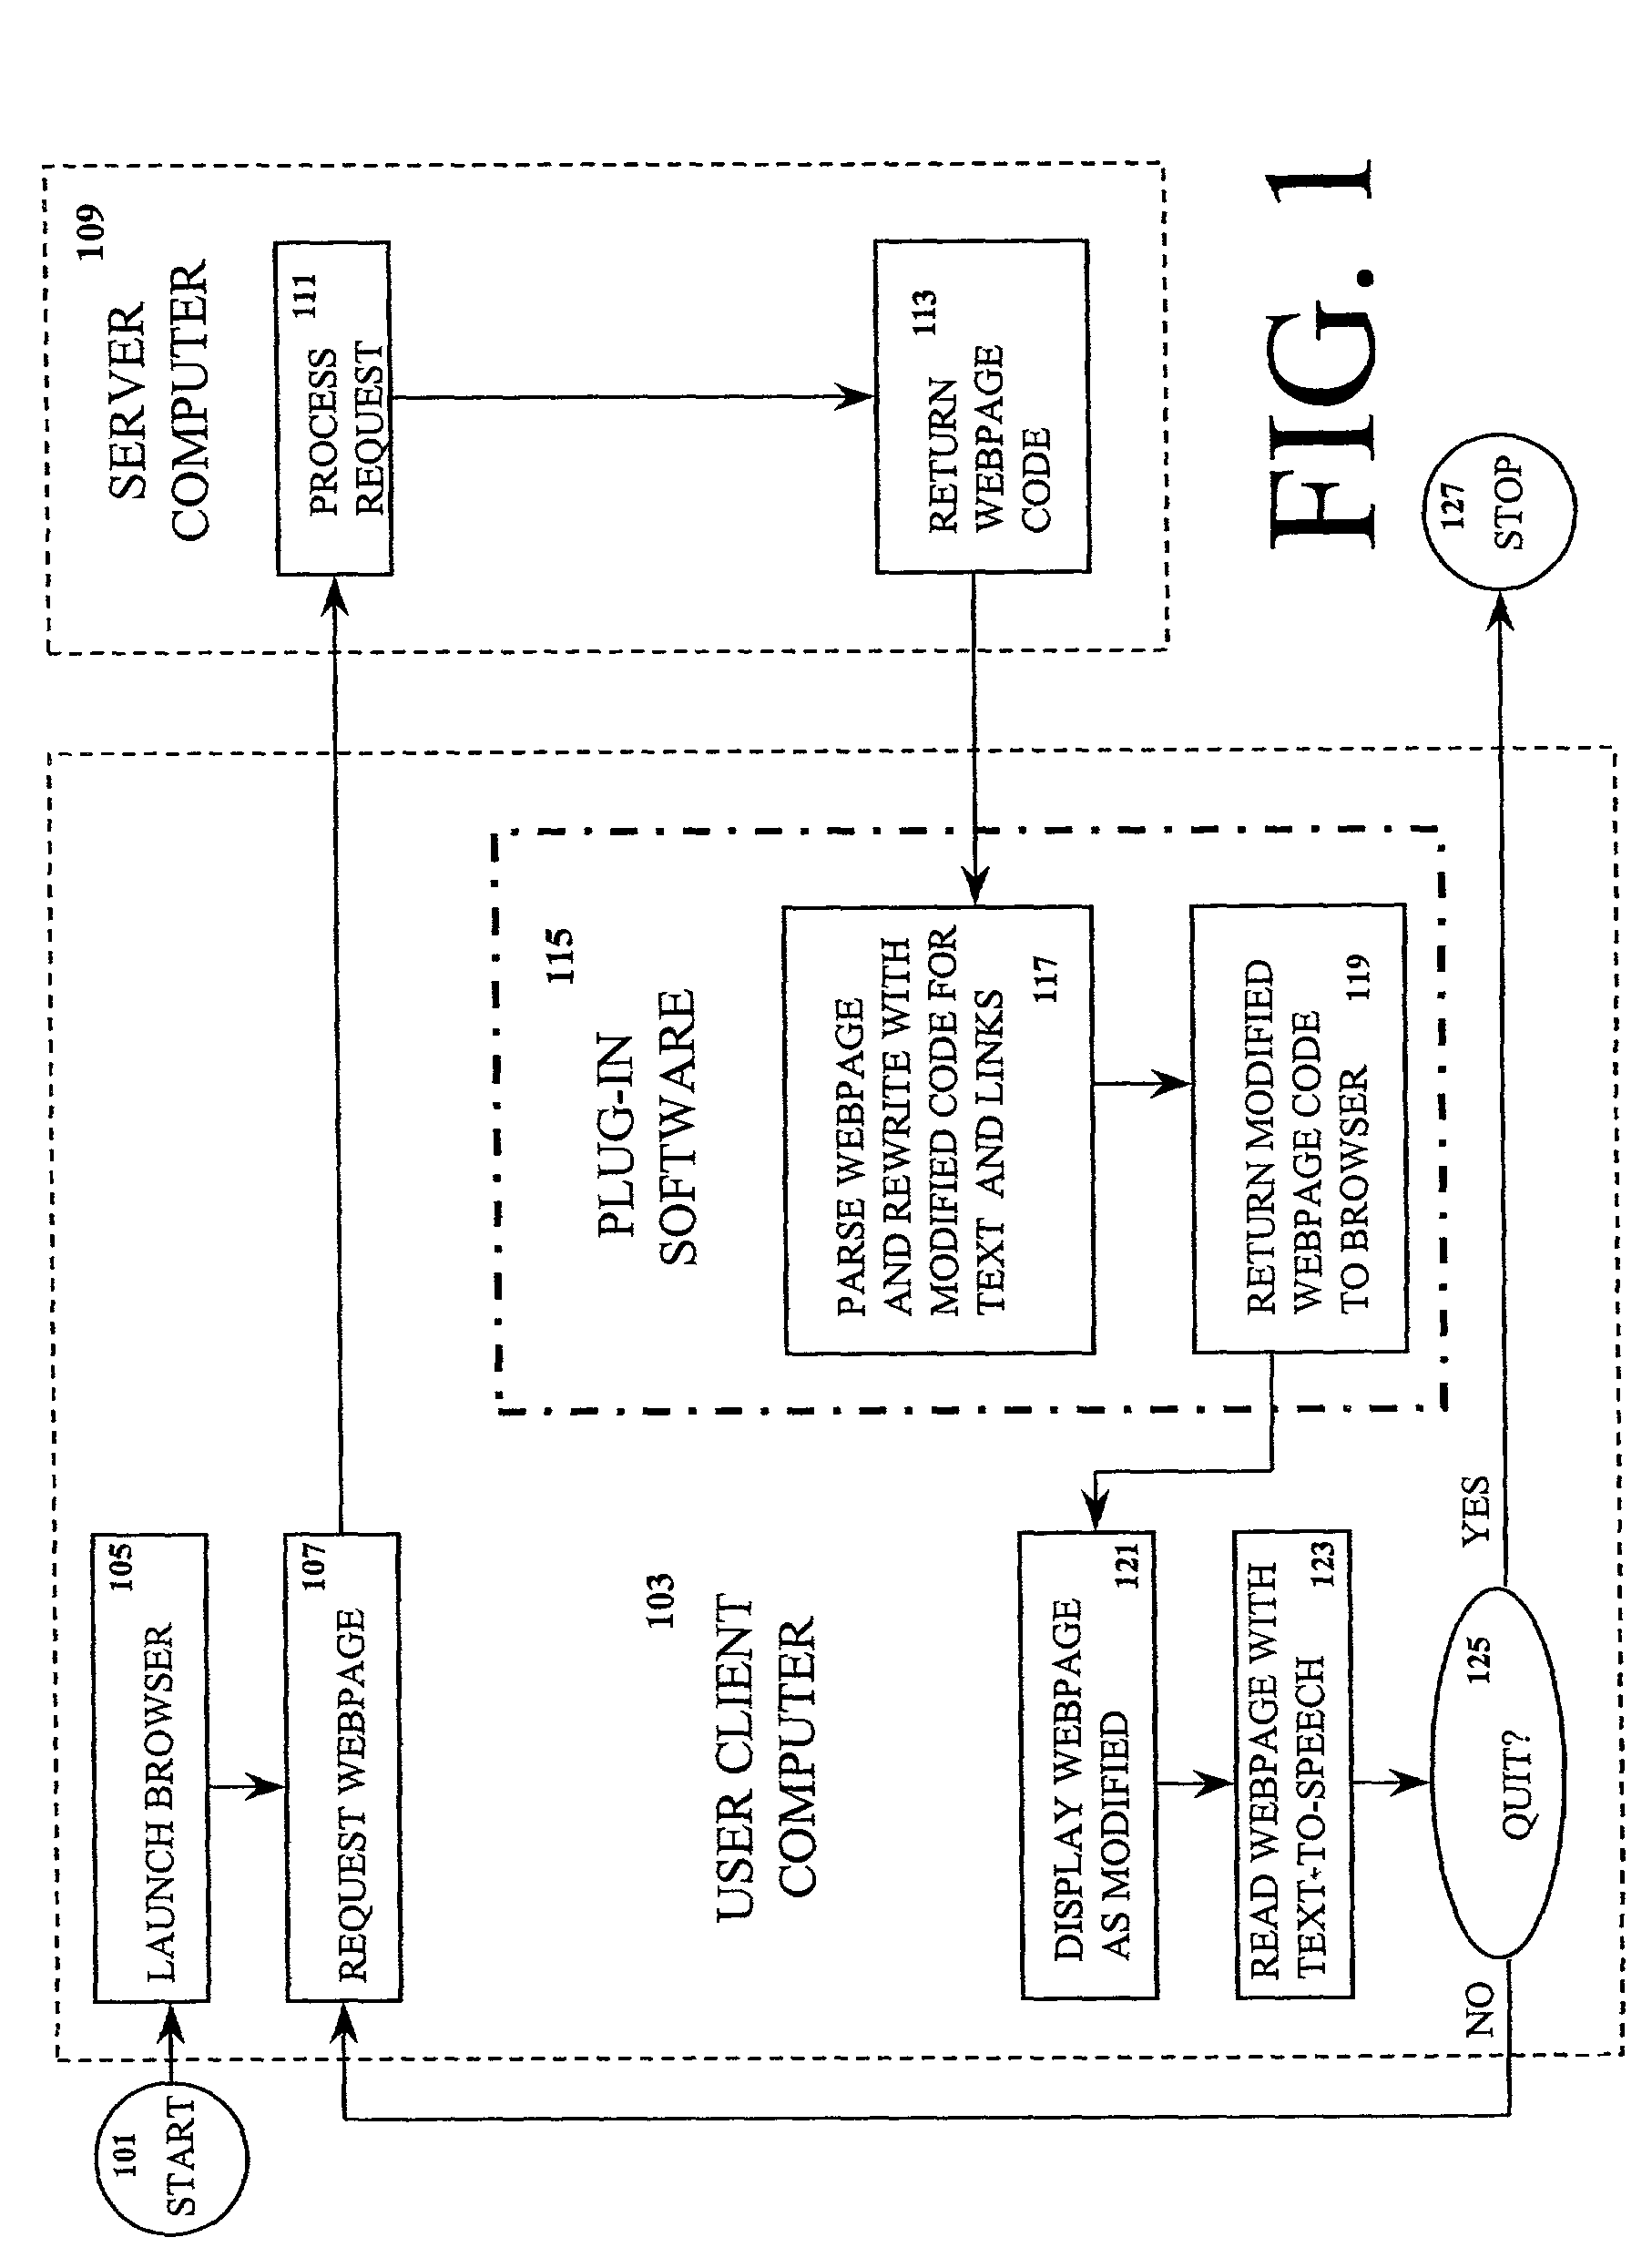 Method of displaying web pages to enable user access to text information that the user has difficulty reading